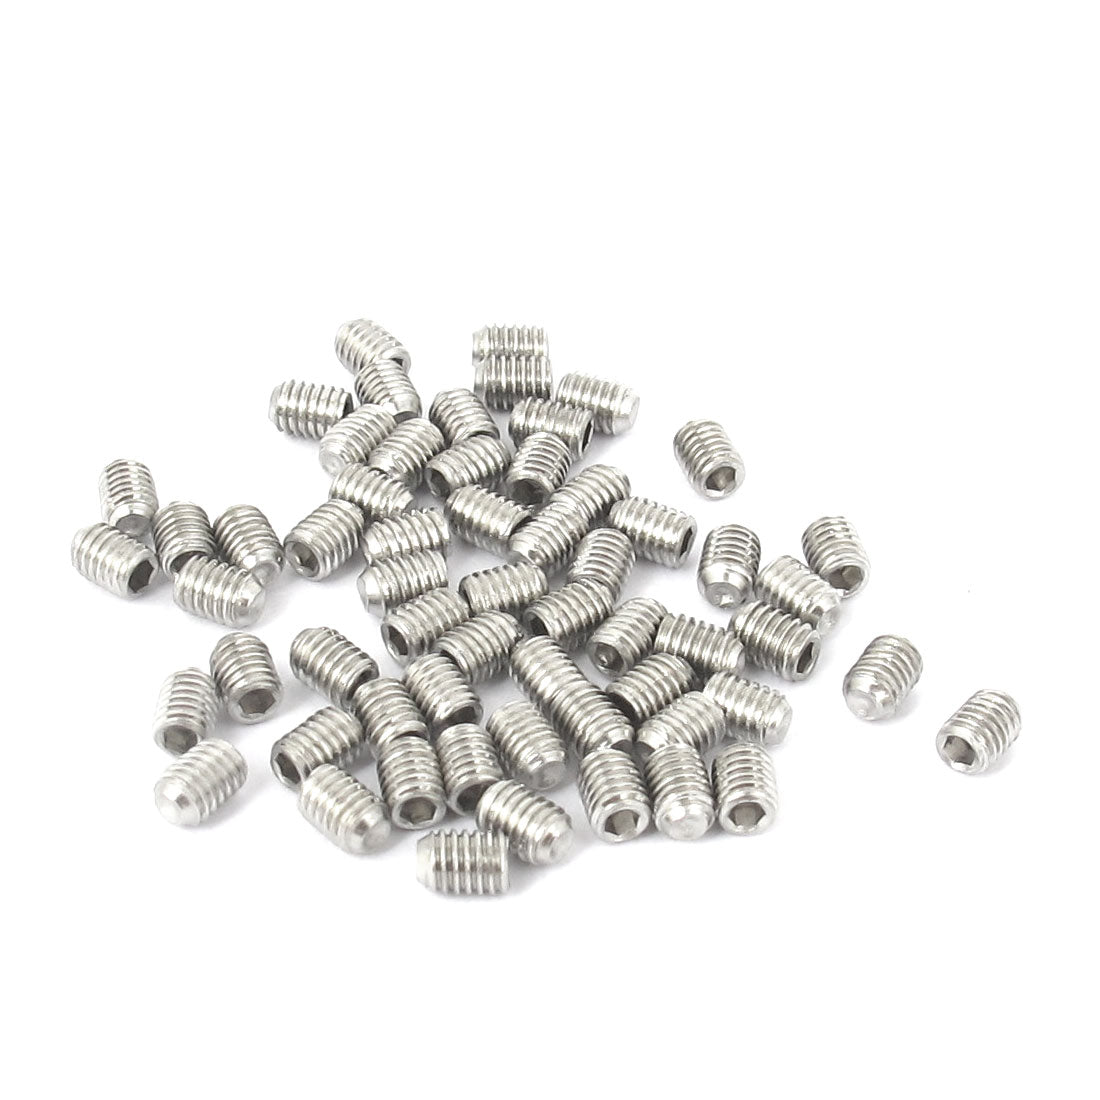 uxcell Uxcell M3x4mm Stainless Steel Hex Socket Set Cap Point Grub Screws Silver Tone 50pcs